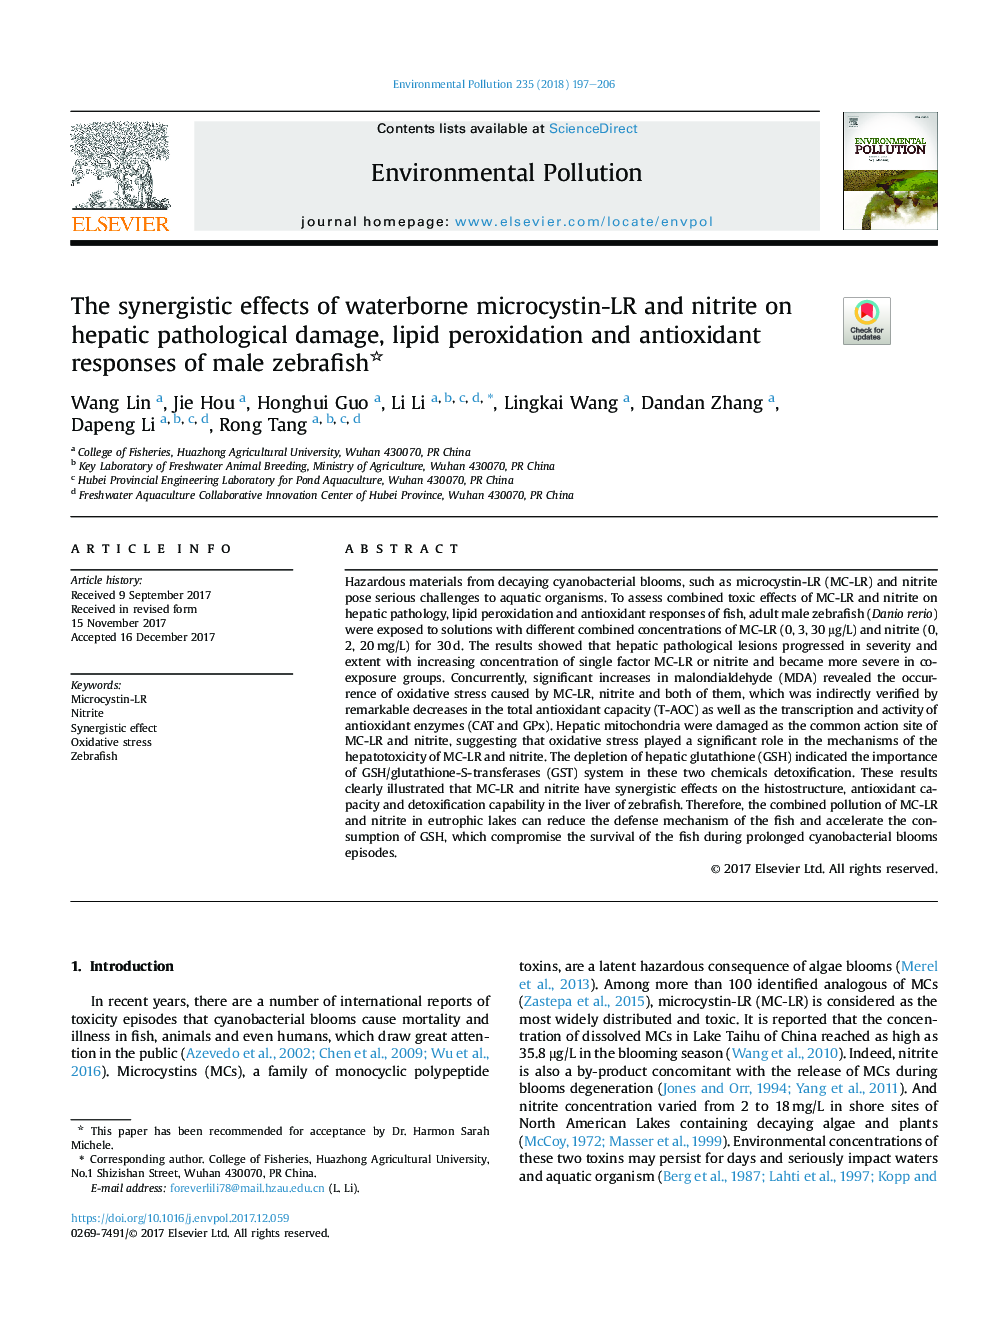 The synergistic effects of waterborne microcystin-LR and nitrite on hepatic pathological damage, lipid peroxidation and antioxidant responses of male zebrafish